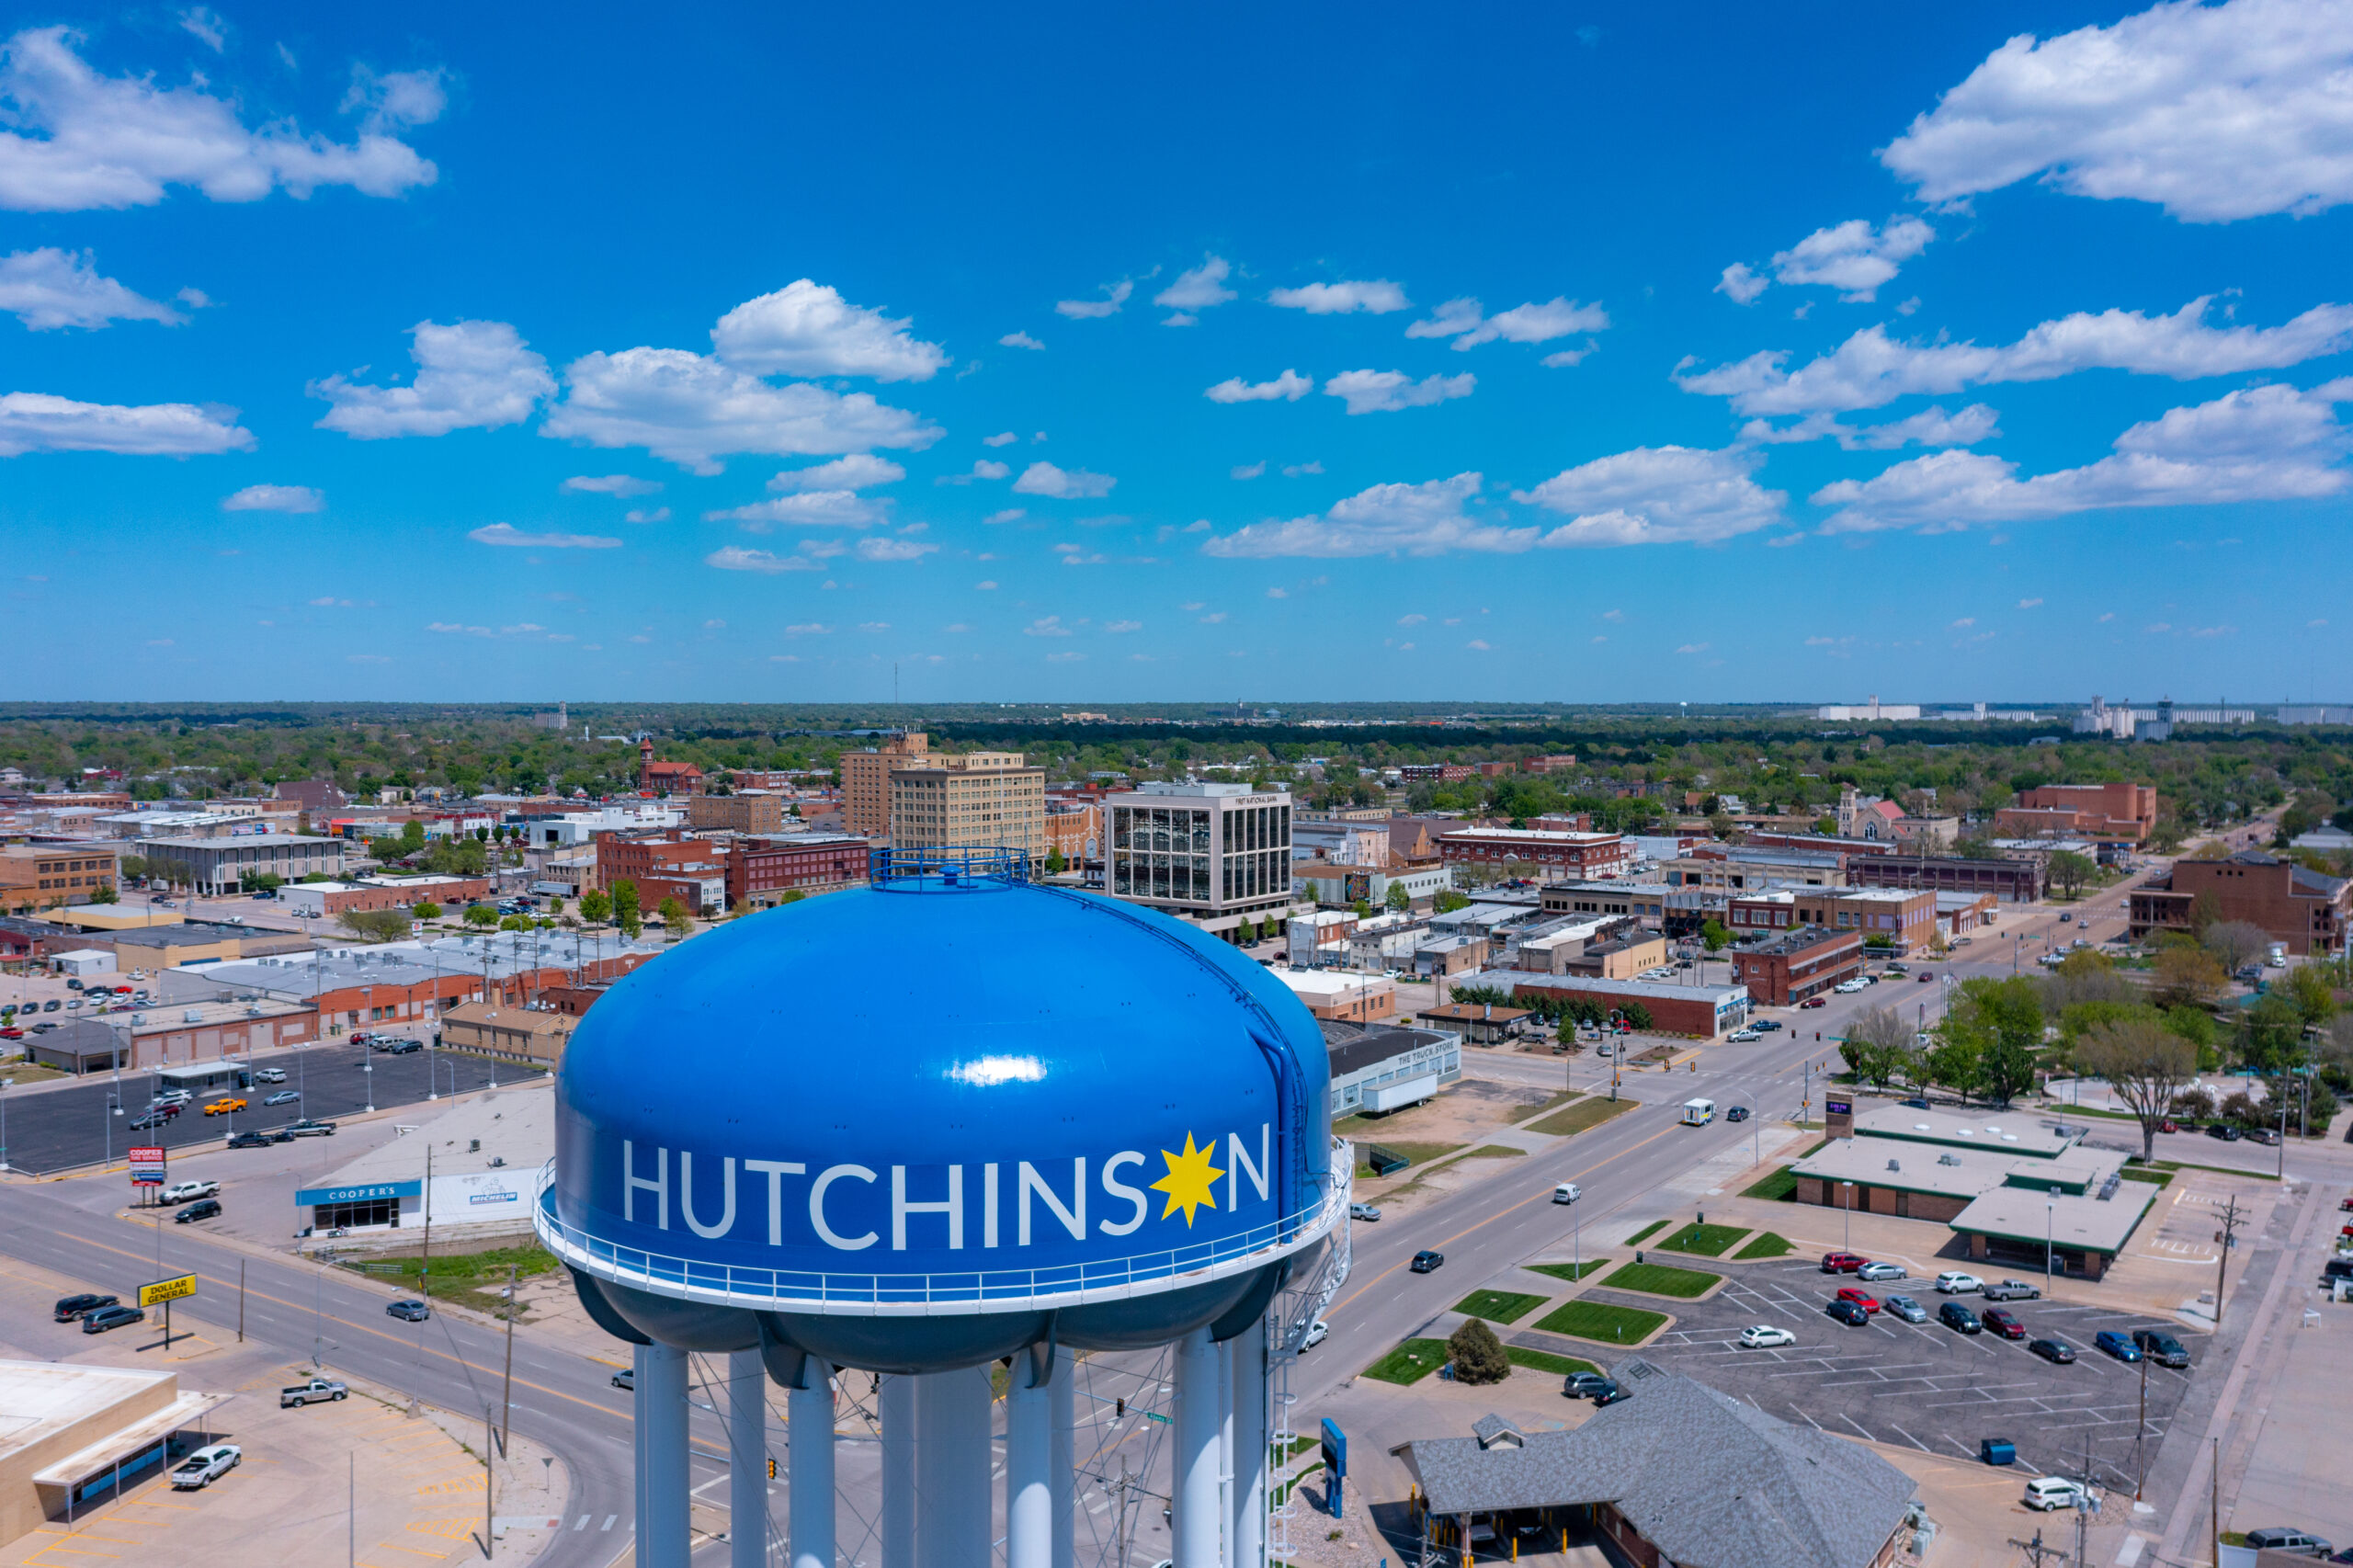 Aerial view of Hutchinson Kansas, the home of Hutchinson Dumpster Rental your one stop shop for all your roll of dumpster needs